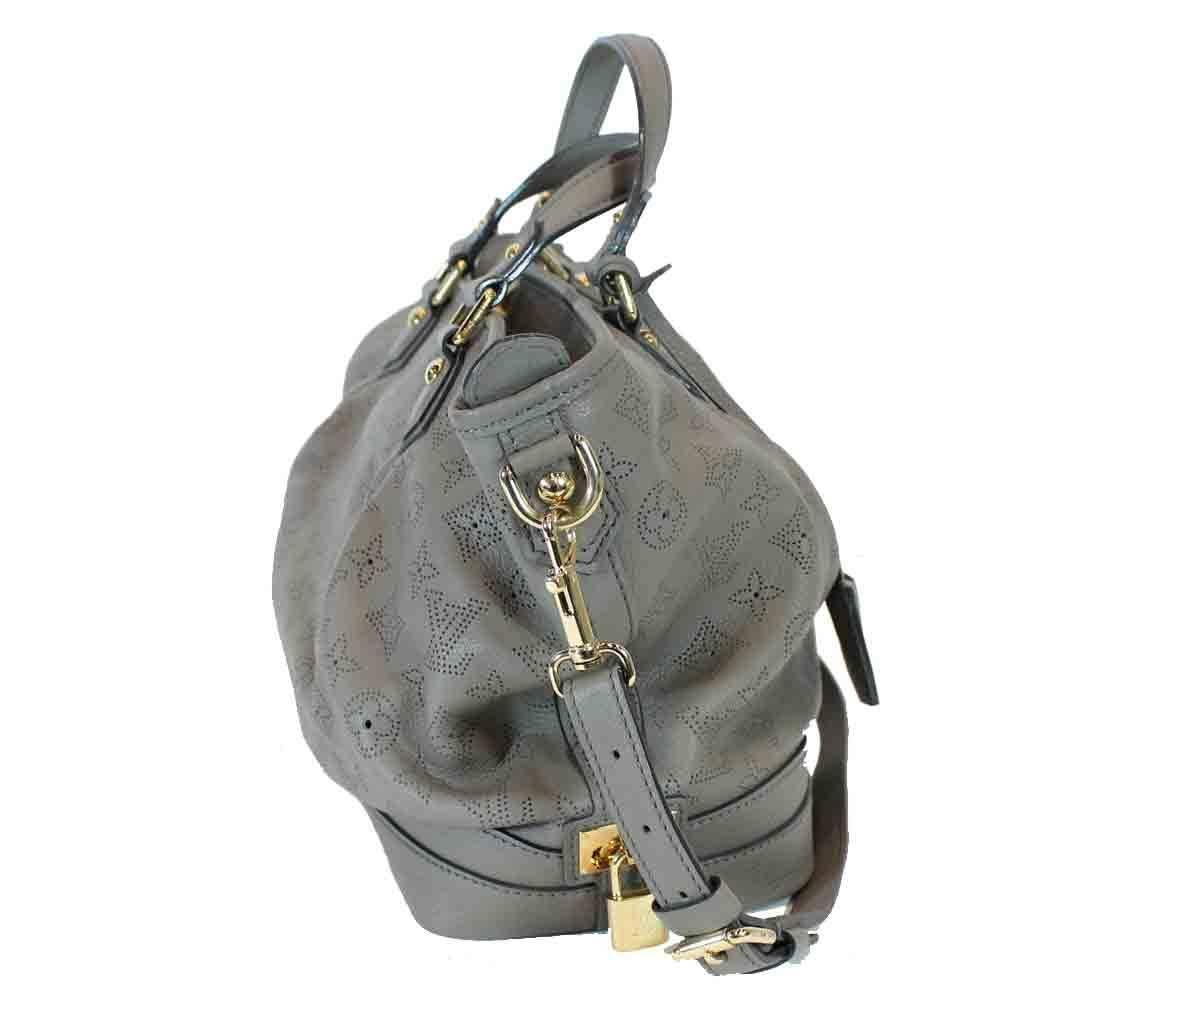 Powder gray leather. Gold-tone hardware. Top zippered closure. Dual top handles. Removable shoulder strap. One large interior zippered pocket. Two interior opened pockets.